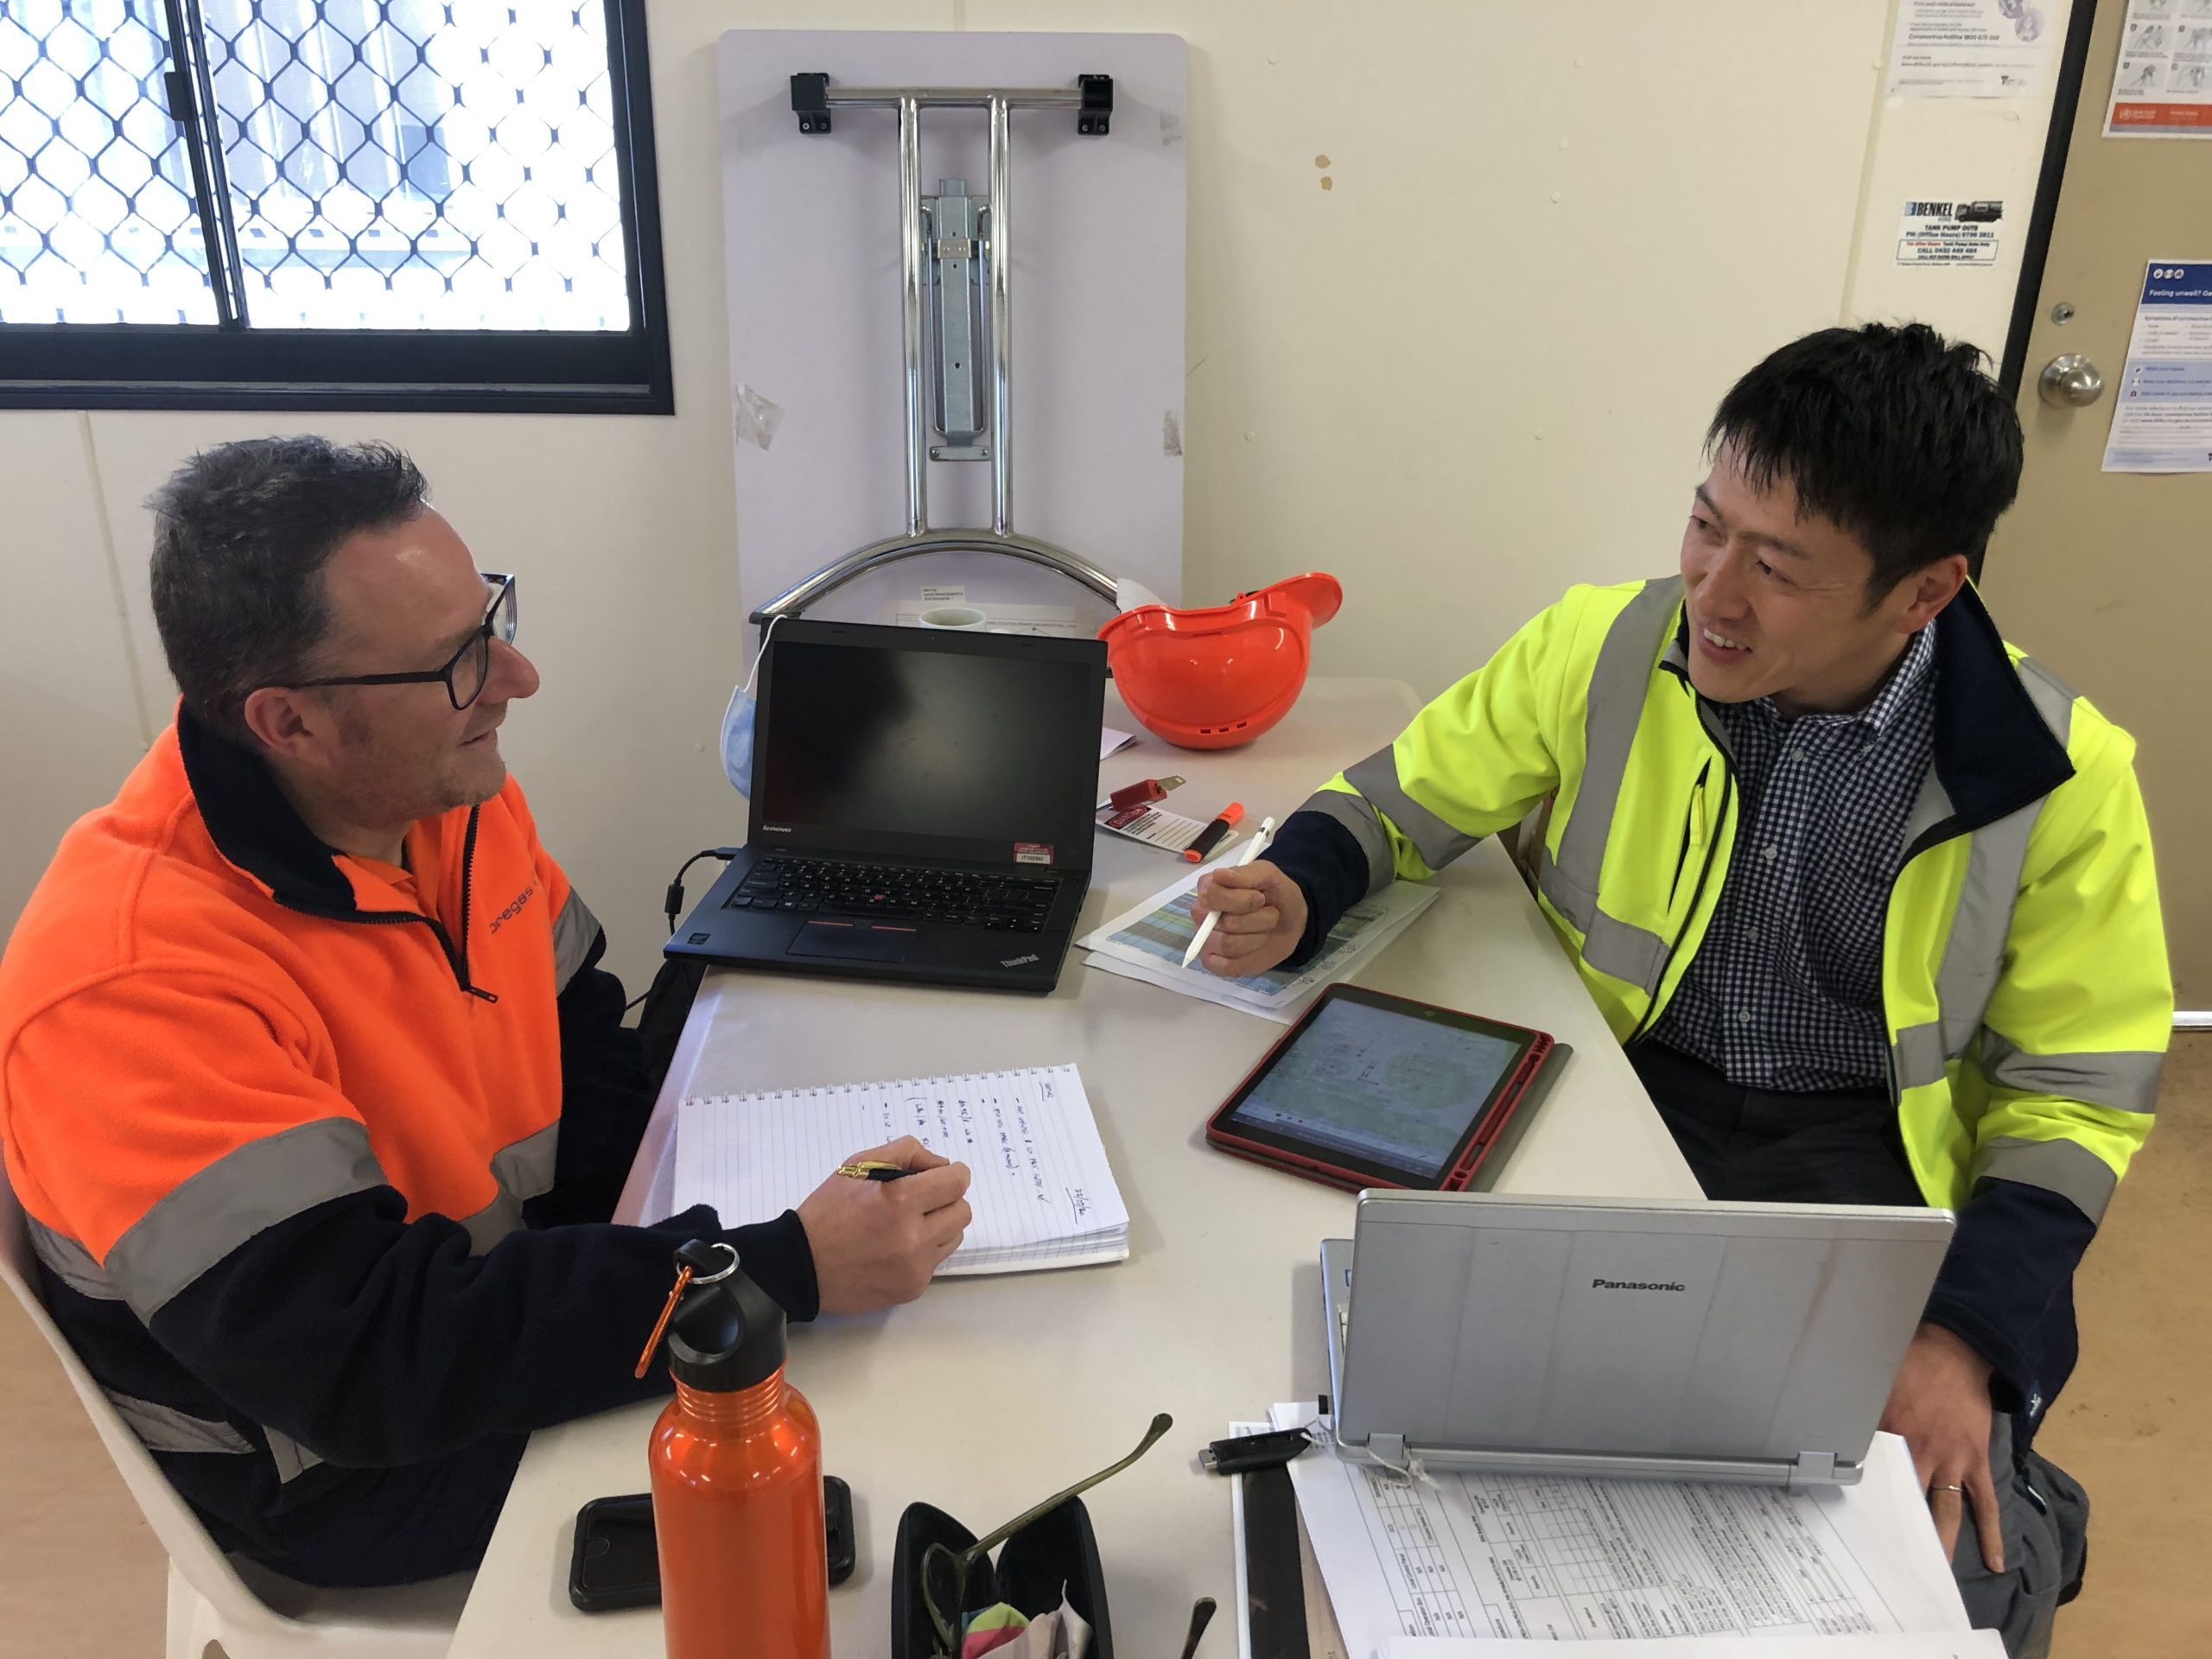 Ross Renna (left) and Hirofumi Kawazoe (right) at the HESC Project site in Hastings